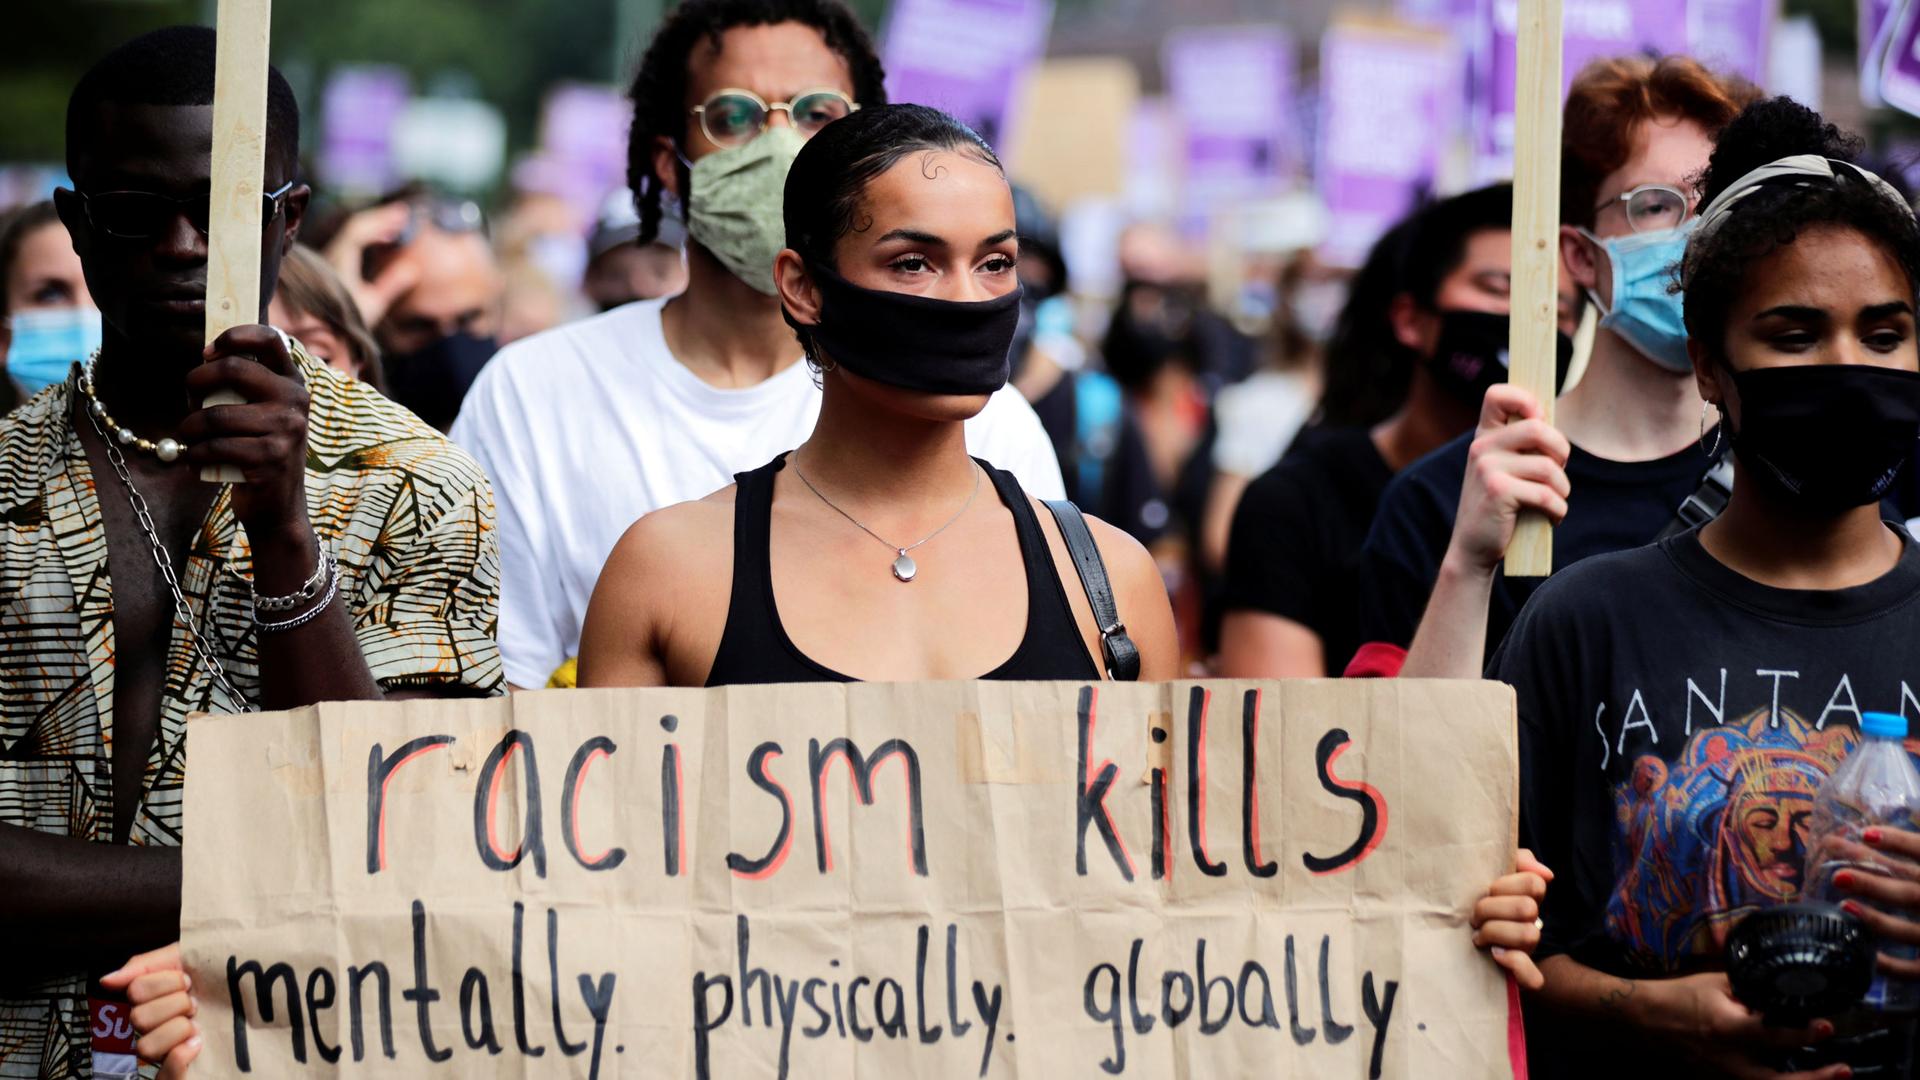 A large crowd of people are shown with a women featured in the center of the photograph holding a sign that reads, racism kills, mentally. physically. globally.